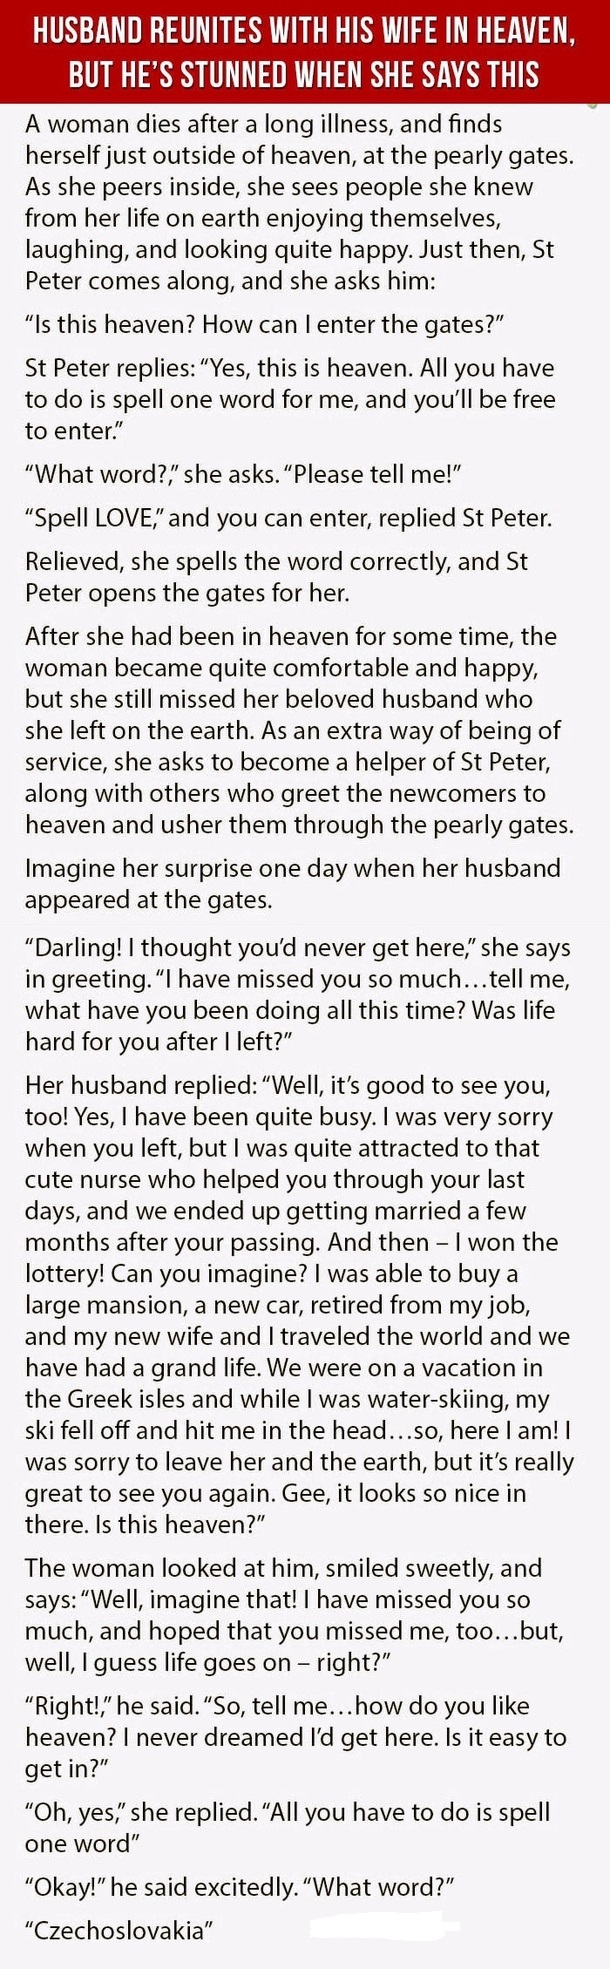 Husband-Reunites-With-His-Wife-In-Heaven-But-He-s-Stunned-When-She-Says-This-10223-1